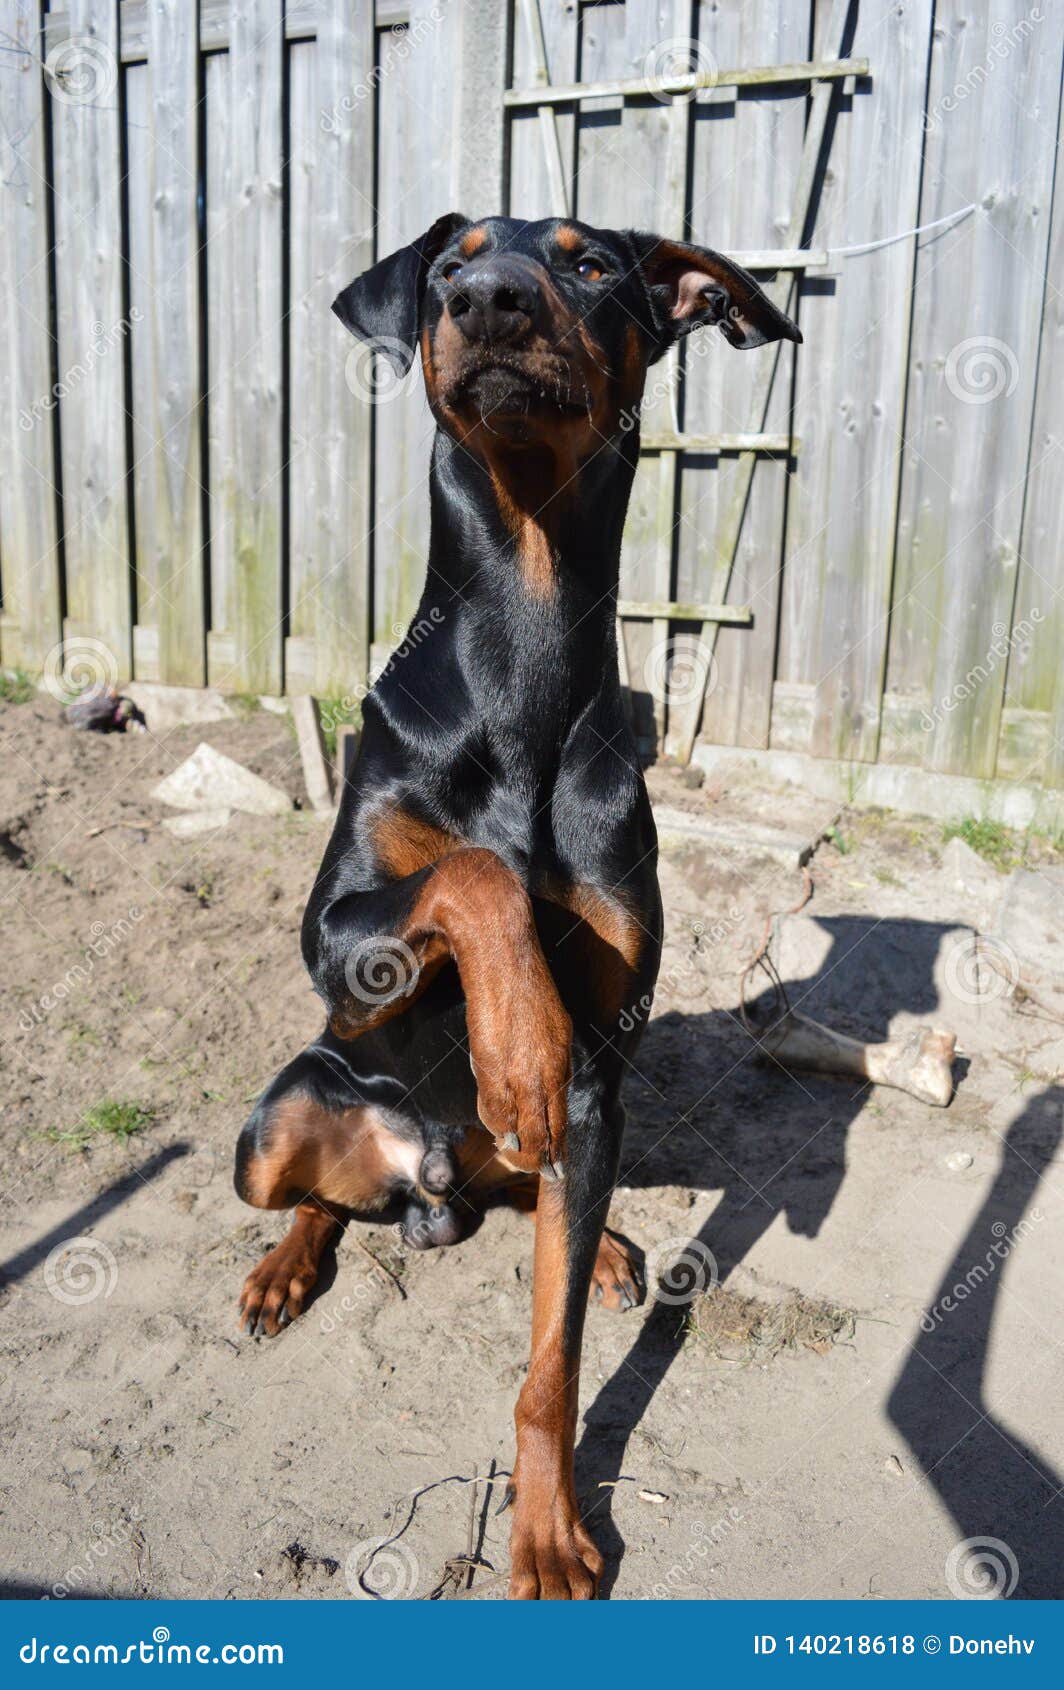 Doberman Holding Up Paw for a Cookie Photo - Image of dogs: 140218618